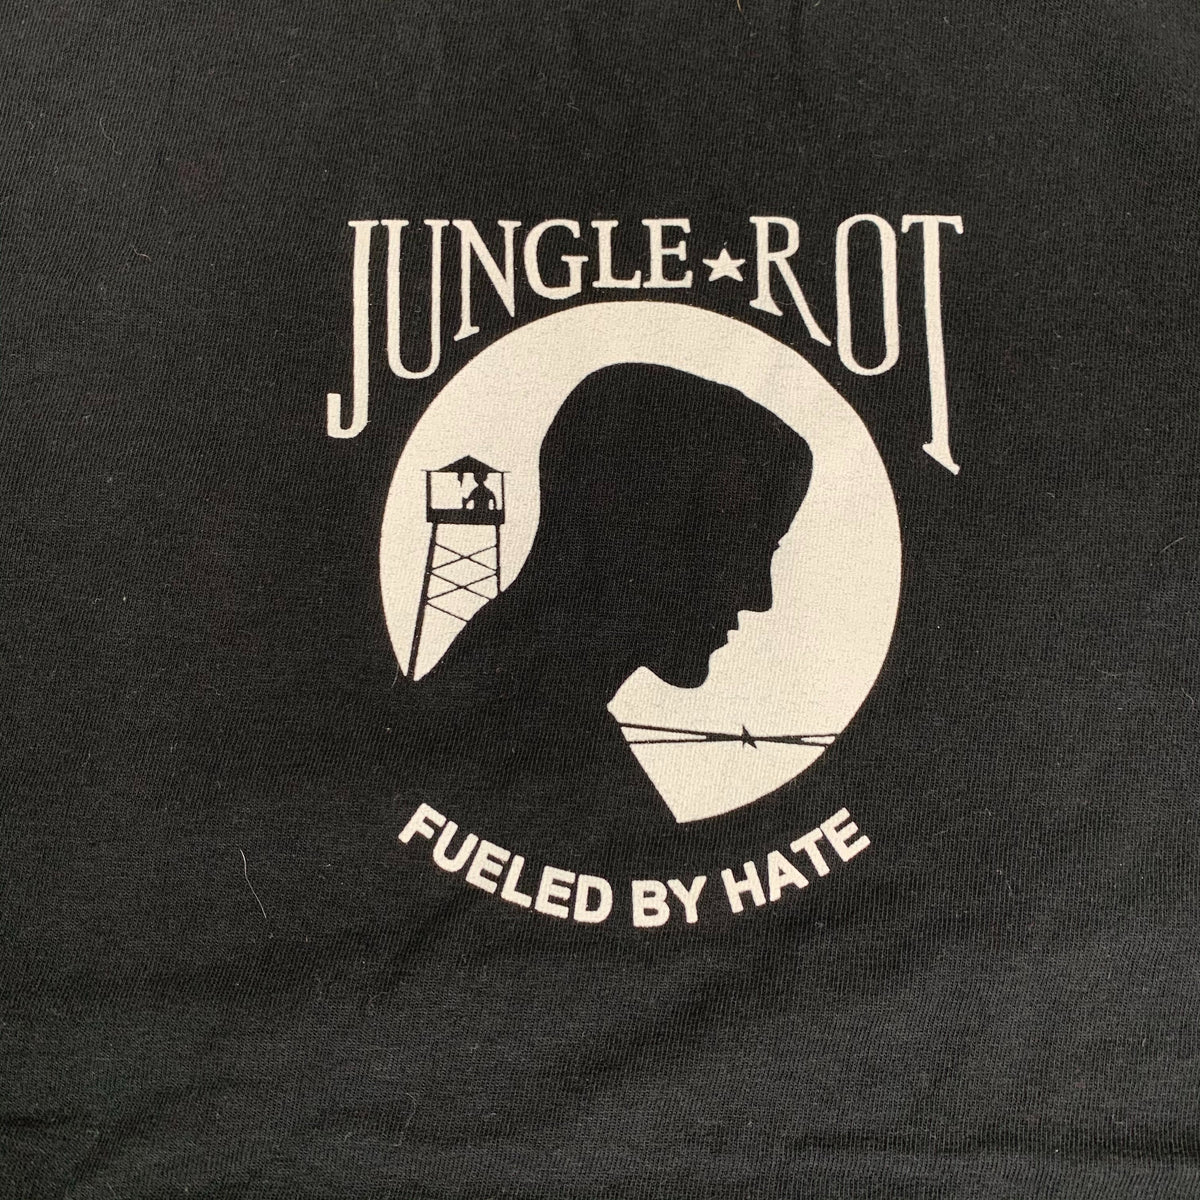 Vintage Jungle Rot &quot;Fueled By Hate&quot; T-Shirt